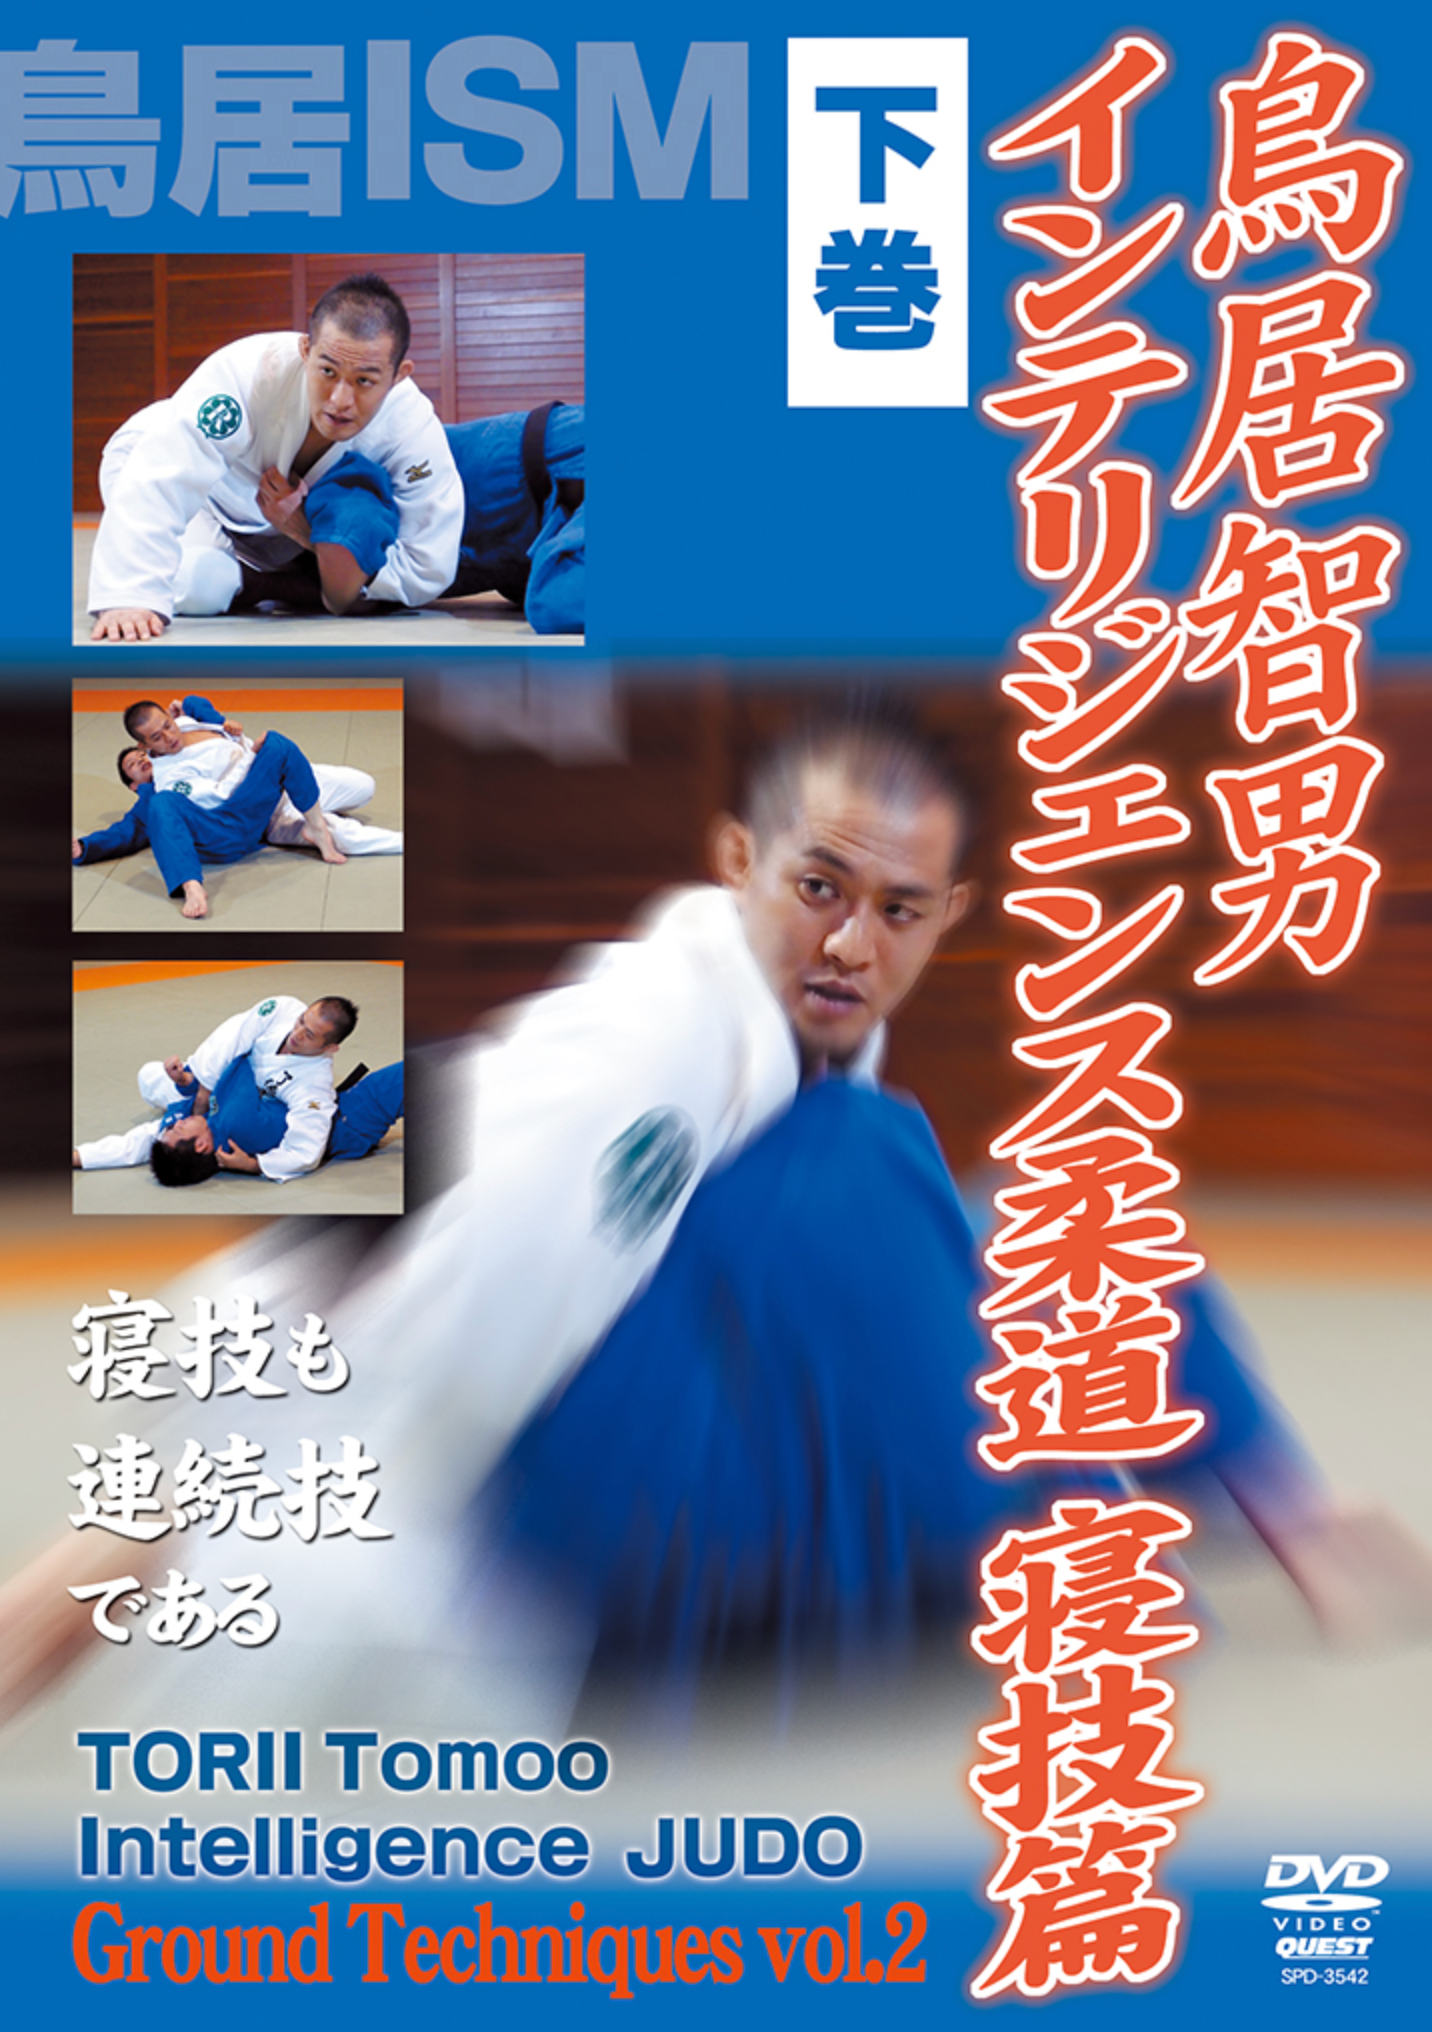 Intelligence Judo Ground Techniques DVD 2 with Tomoo Torii - Budovideos Inc